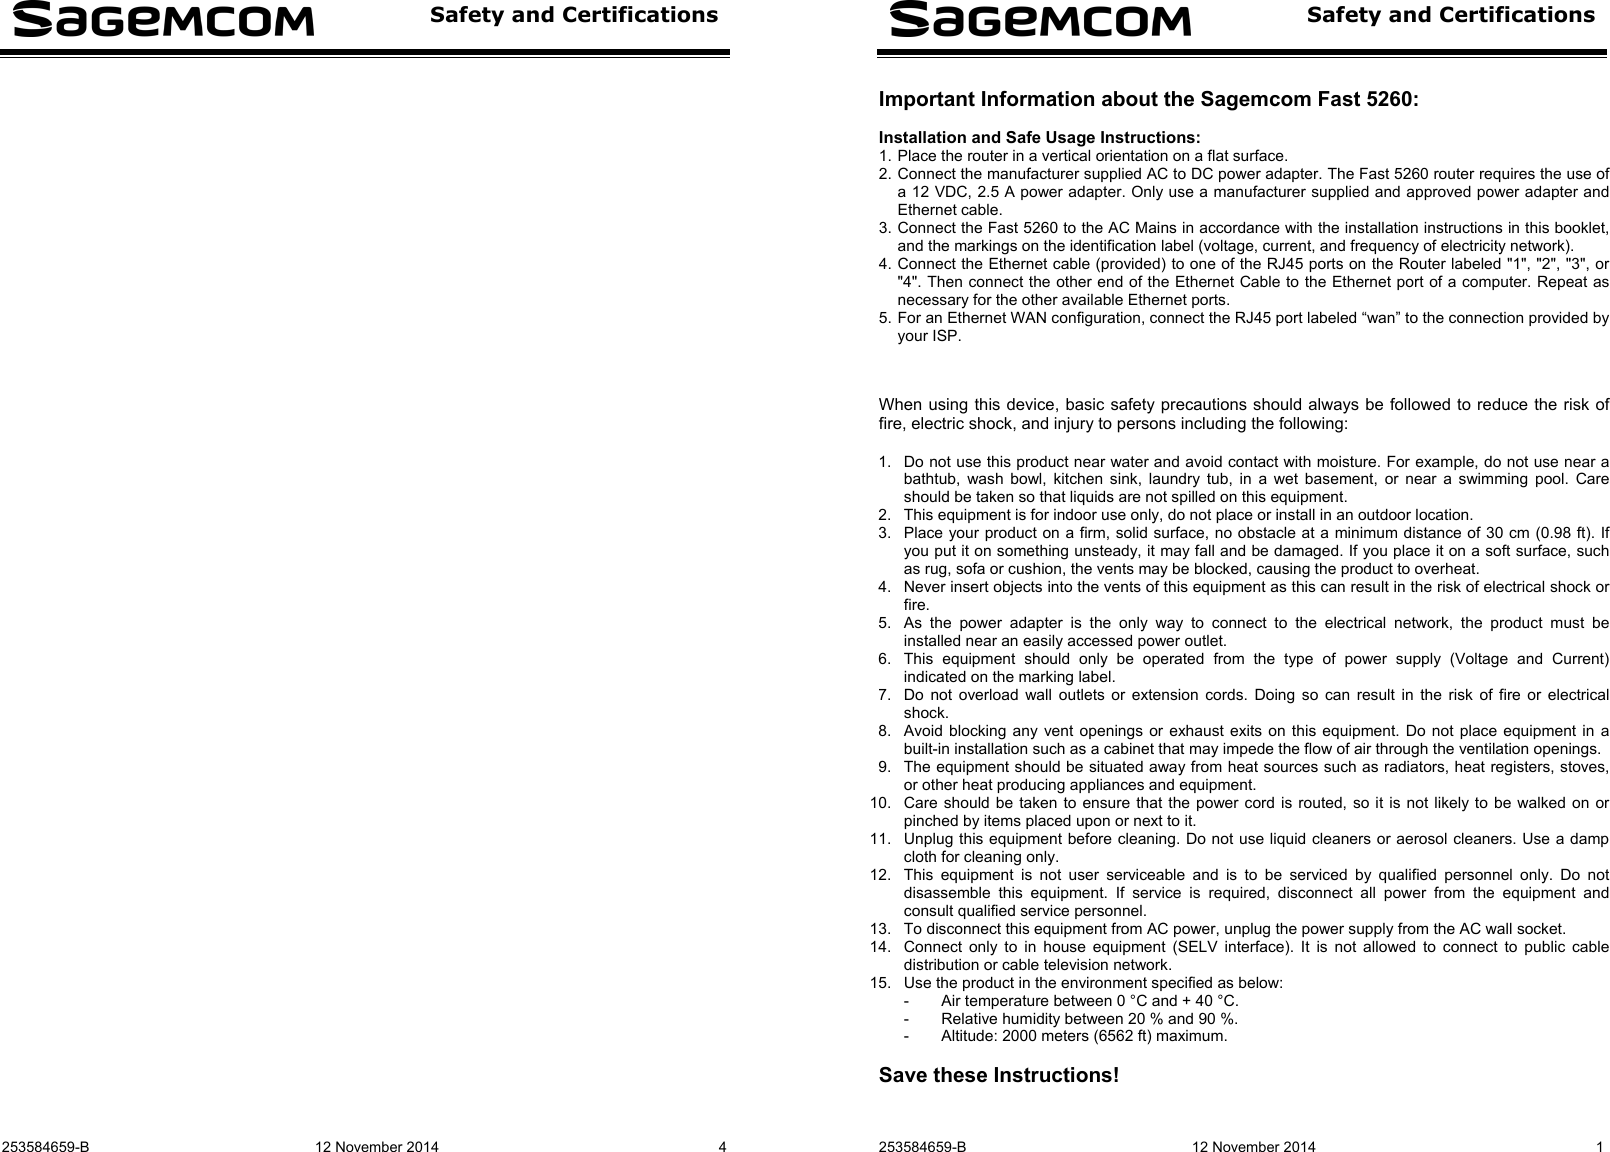  Safety and Certifications  253584659-B  12 November 2014  4    Safety and Certifications   253584659-B  12 November 2014  1 Important Information about the Sagemcom Fast 5260:  Installation and Safe Usage Instructions: 1. Place the router in a vertical orientation on a flat surface. 2. Connect the manufacturer supplied AC to DC power adapter. The Fast 5260 router requires the use of a 12 VDC, 2.5 A power adapter. Only use a manufacturer supplied and approved power adapter and Ethernet cable. 3. Connect the Fast 5260 to the AC Mains in accordance with the installation instructions in this booklet, and the markings on the identification label (voltage, current, and frequency of electricity network). 4. Connect the Ethernet cable (provided) to one of the RJ45 ports on the Router labeled &quot;1&quot;, &quot;2&quot;, &quot;3&quot;, or &quot;4&quot;. Then connect the other end of the Ethernet Cable to the Ethernet port of a computer. Repeat as necessary for the other available Ethernet ports. 5. For an Ethernet WAN configuration, connect the RJ45 port labeled “wan” to the connection provided by your ISP.    When using this device, basic safety precautions should always be followed to reduce the risk of fire, electric shock, and injury to persons including the following:  1.  Do not use this product near water and avoid contact with moisture. For example, do not use near a bathtub, wash bowl, kitchen sink, laundry tub, in a wet basement, or near a swimming pool. Care should be taken so that liquids are not spilled on this equipment. 2.  This equipment is for indoor use only, do not place or install in an outdoor location. 3.  Place your product on a firm, solid surface, no obstacle at a minimum distance of 30 cm (0.98 ft). If you put it on something unsteady, it may fall and be damaged. If you place it on a soft surface, such as rug, sofa or cushion, the vents may be blocked, causing the product to overheat. 4.  Never insert objects into the vents of this equipment as this can result in the risk of electrical shock or fire. 5.  As the power adapter is the only way to connect to the electrical network, the product must be installed near an easily accessed power outlet. 6.  This equipment should only be operated from the type of power supply (Voltage and Current) indicated on the marking label. 7.  Do not overload wall outlets or extension cords. Doing so can result in the risk of fire or electrical shock. 8.  Avoid blocking any vent openings or exhaust exits on this equipment. Do not place equipment in a built-in installation such as a cabinet that may impede the flow of air through the ventilation openings. 9.  The equipment should be situated away from heat sources such as radiators, heat registers, stoves, or other heat producing appliances and equipment. 10.  Care should be taken to ensure that the power cord is routed, so it is not likely to be walked on or pinched by items placed upon or next to it. 11.  Unplug this equipment before cleaning. Do not use liquid cleaners or aerosol cleaners. Use a damp cloth for cleaning only. 12.  This equipment is not user serviceable and is to be serviced by qualified personnel only. Do not disassemble this equipment. If service is required, disconnect all power from the equipment and consult qualified service personnel. 13.  To disconnect this equipment from AC power, unplug the power supply from the AC wall socket. 14.  Connect only to in house equipment (SELV interface). It is not allowed to connect to public cable distribution or cable television network. 15.  Use the product in the environment specified as below: -  Air temperature between 0 °C and + 40 °C. -  Relative humidity between 20 % and 90 %. -  Altitude: 2000 meters (6562 ft) maximum.  Save these Instructions!  